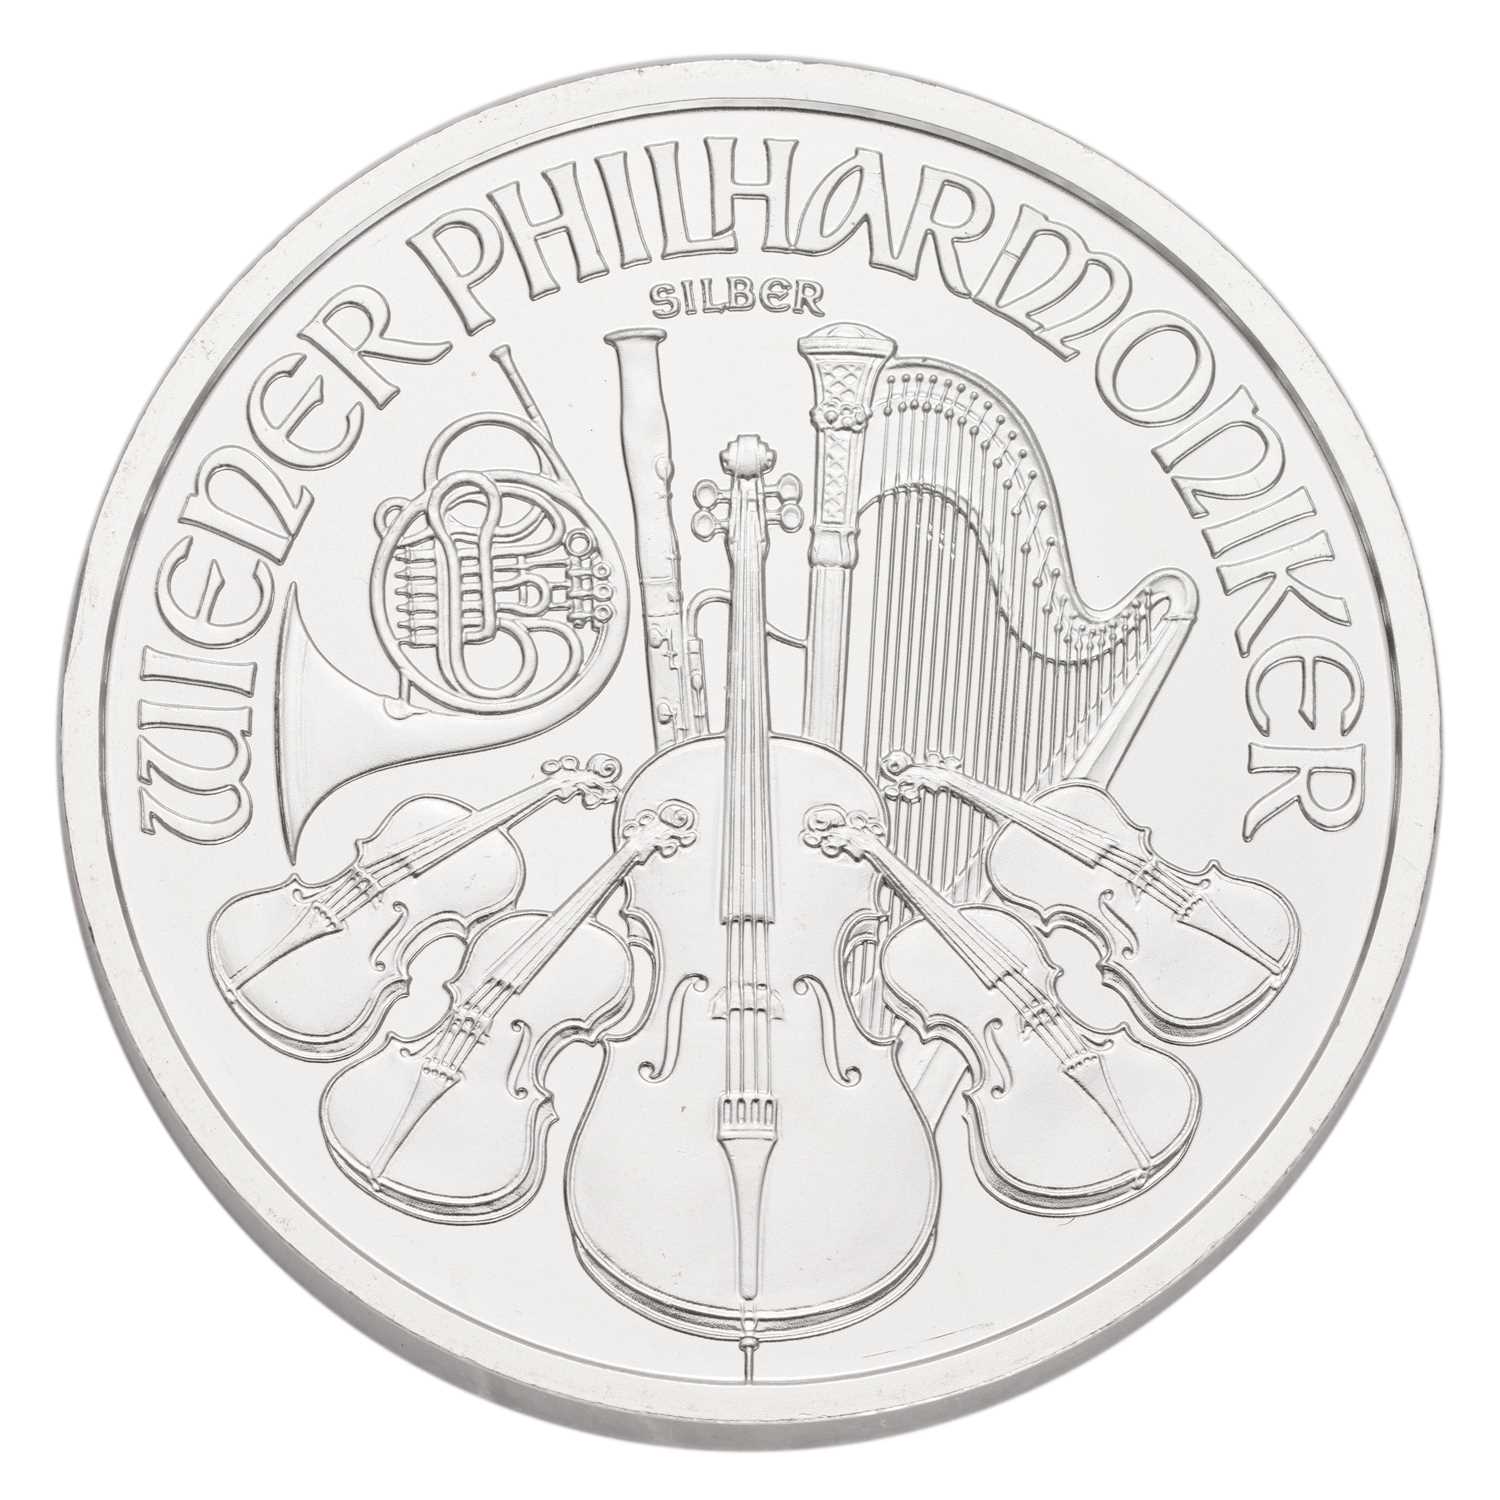 20x Austria 1oz Fine Silver Coins 2011; Vienna Philharmonic design, €1.50 face value; housed in - Image 3 of 3